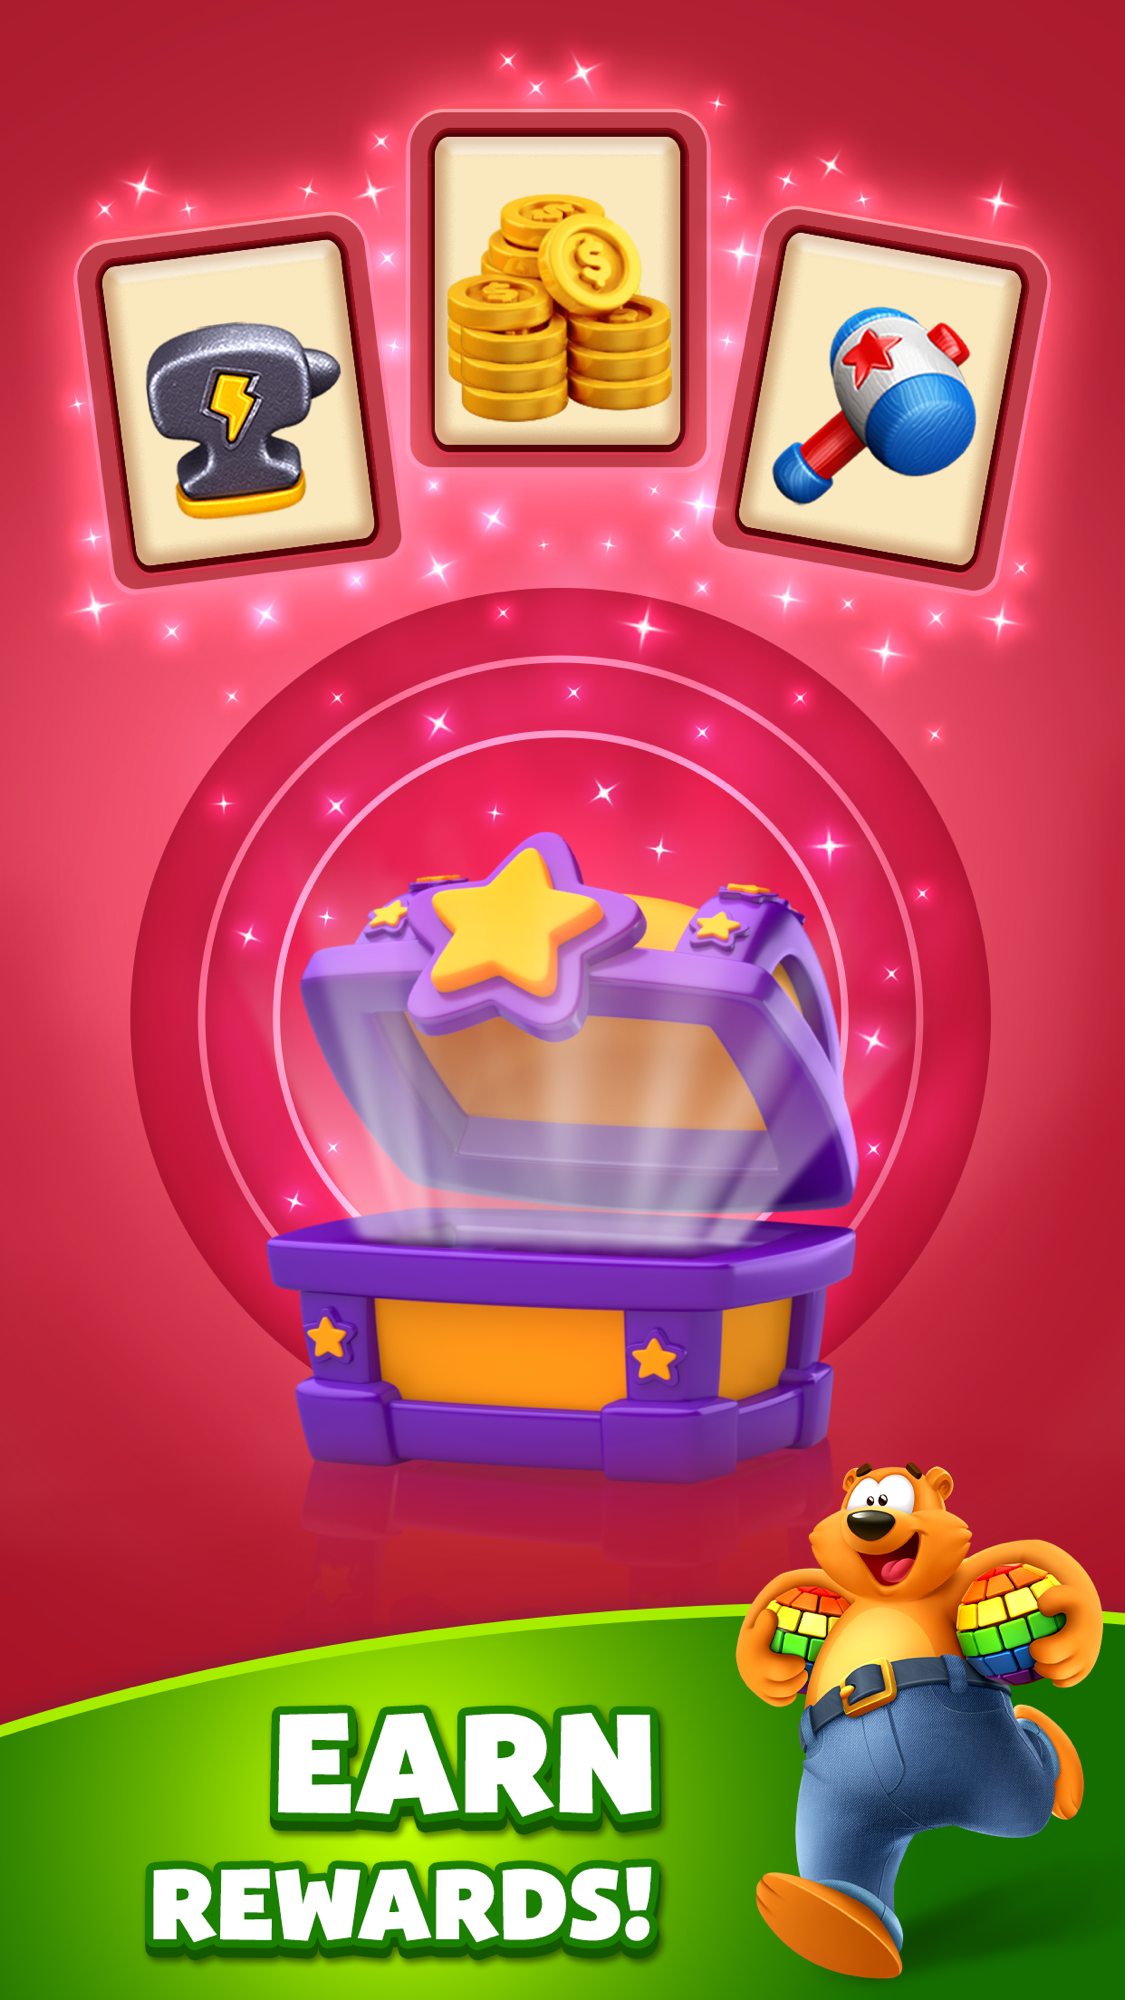 Toon Blast  Featured Image for Version 